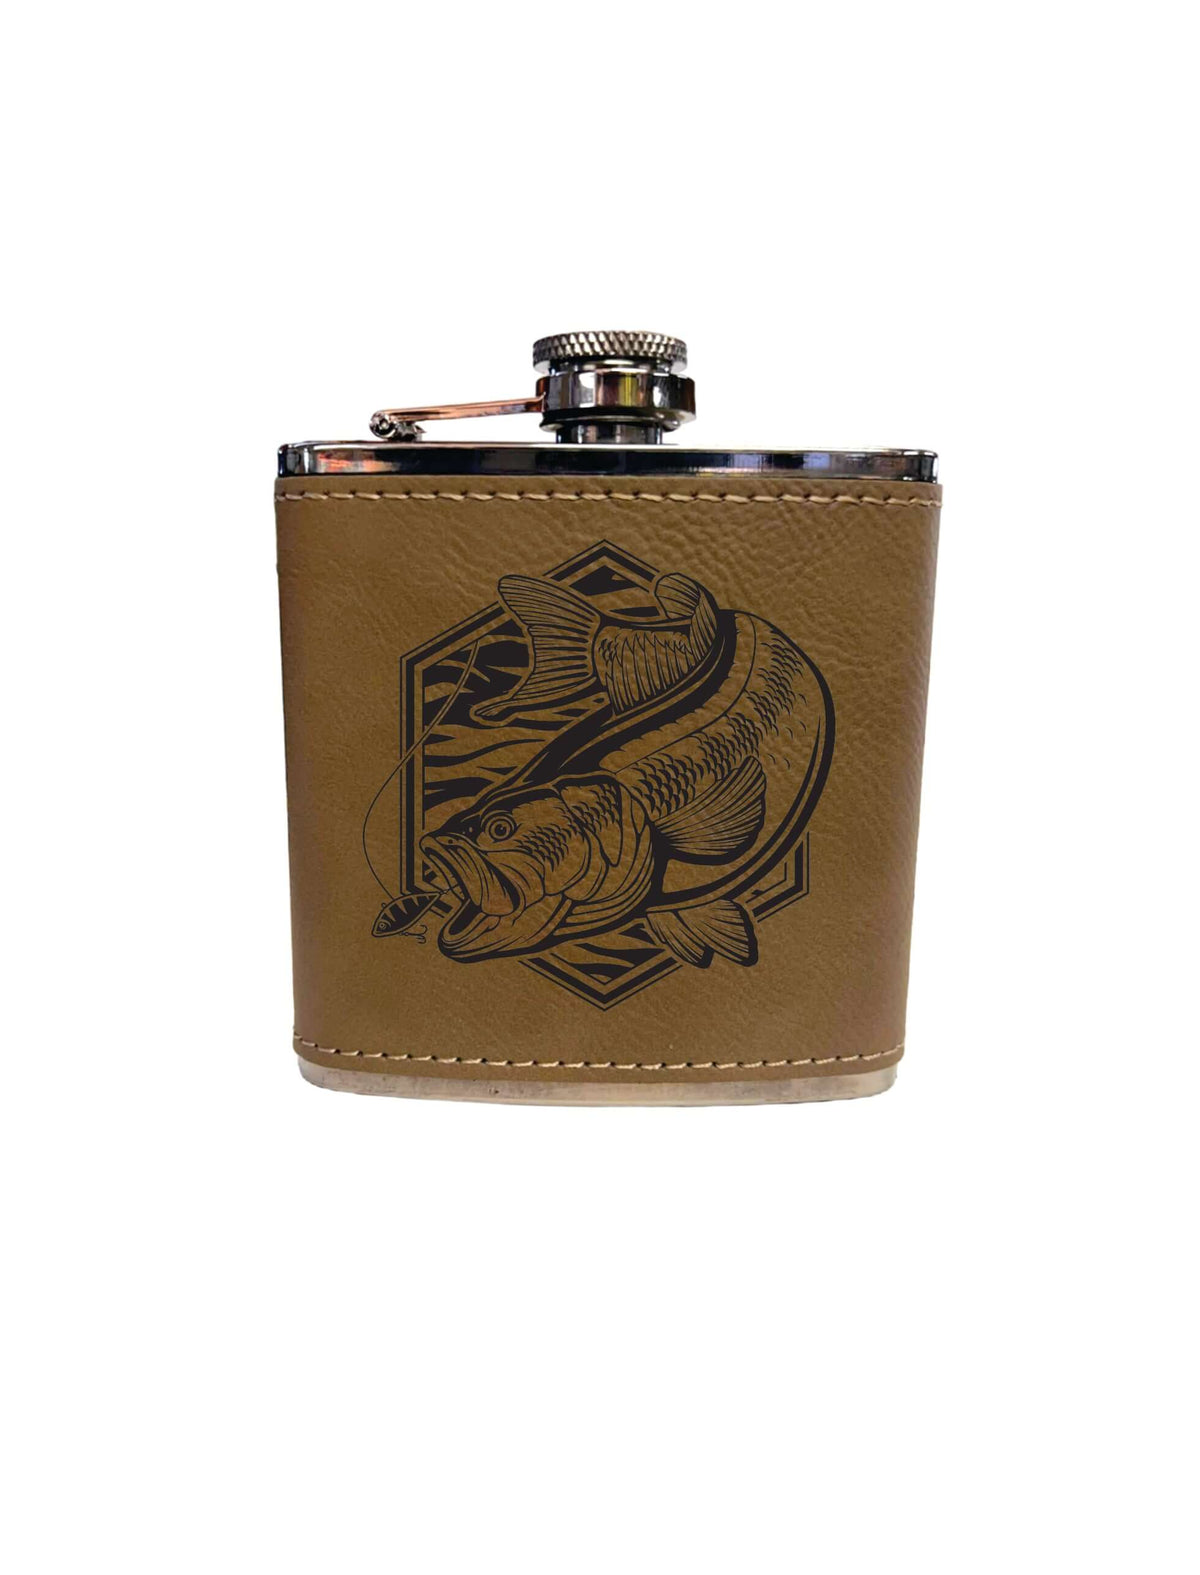 This 6 oz Bass Flask is crafted from durable leatherette and features an intricate engraved bass fishing design. The perfect gift for any fishing enthusiast, this flask offers an efficient way to keep your favorite beverages.